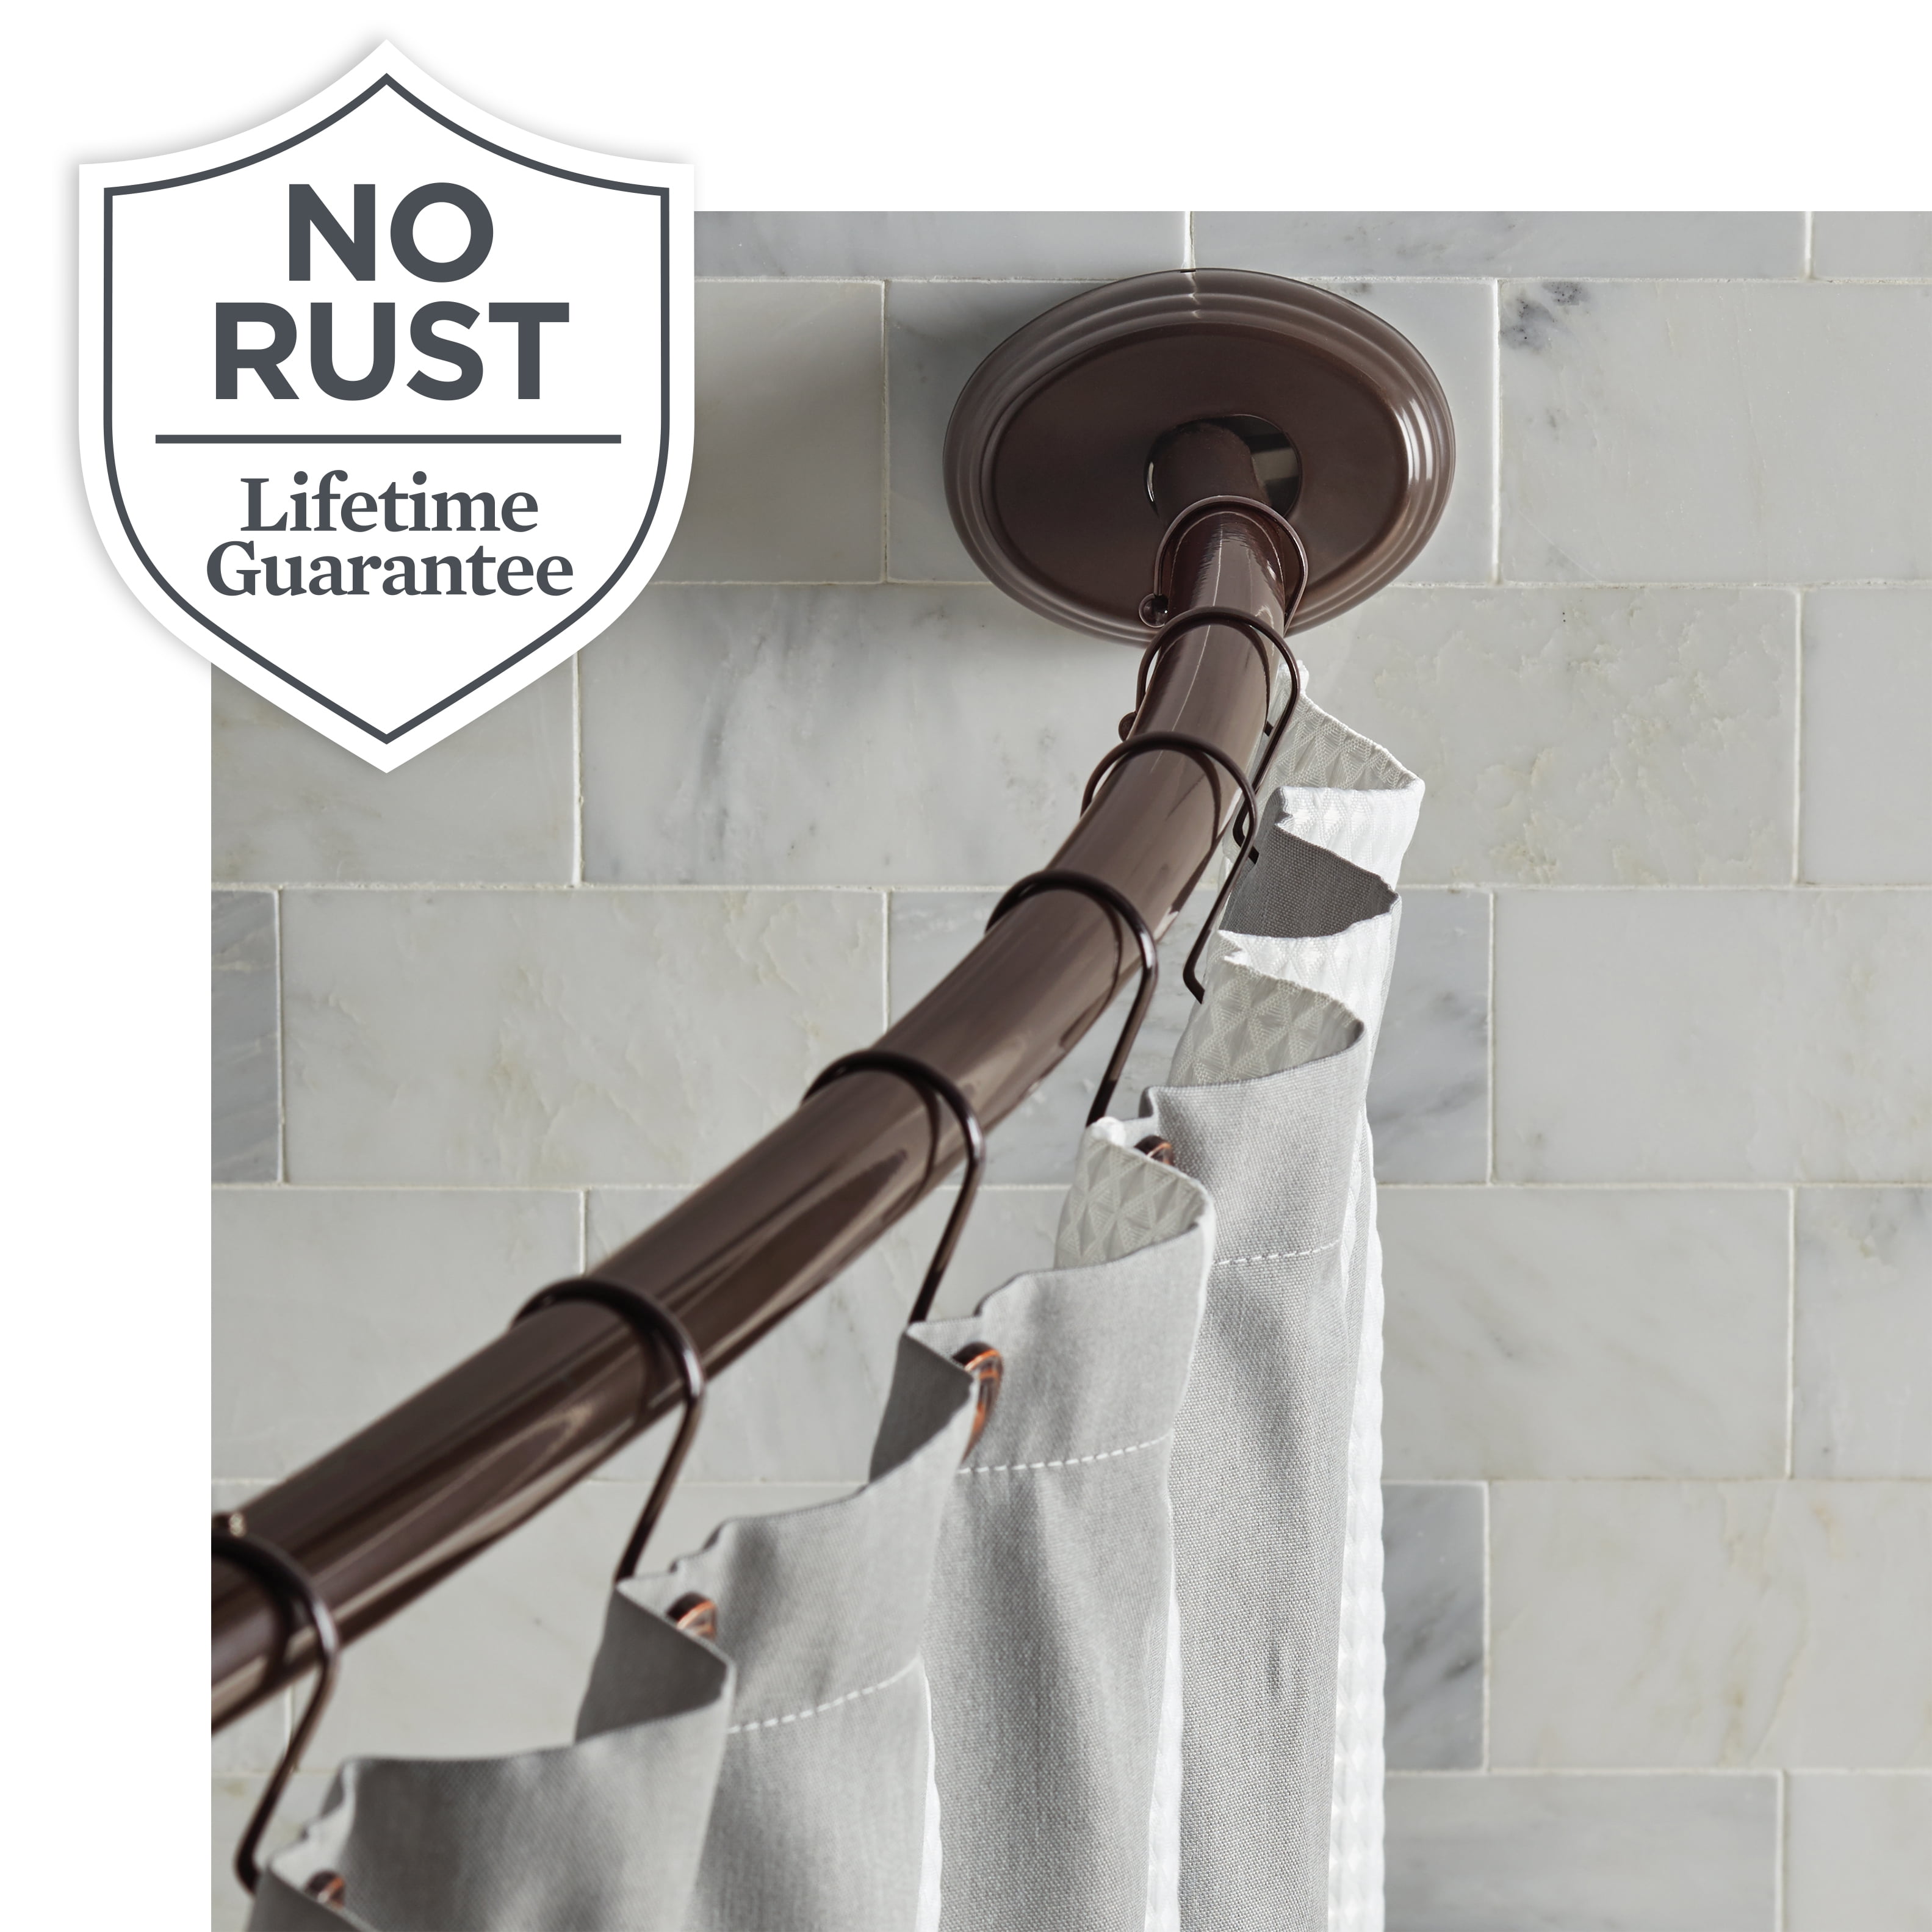 Add extra storage with an extra shower curtain rod, then all you